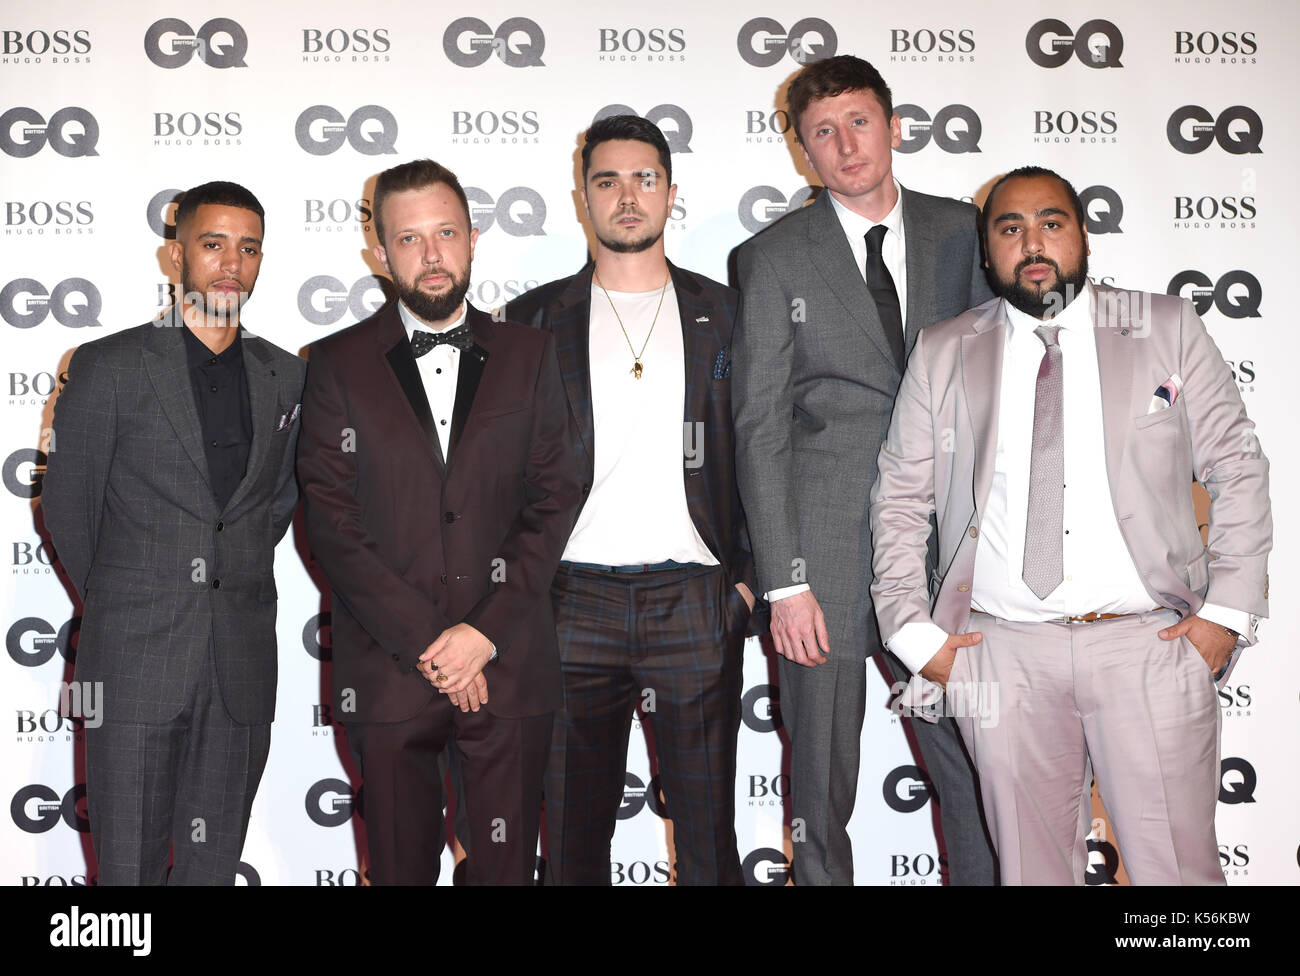 Photo Must Be Credited ©Alpha Press 079965 05/09/2017 Kurupt FM cast Asim Chaudhry GQ Men Of The Year Awards 2017 at Tate Modern London Stock Photo